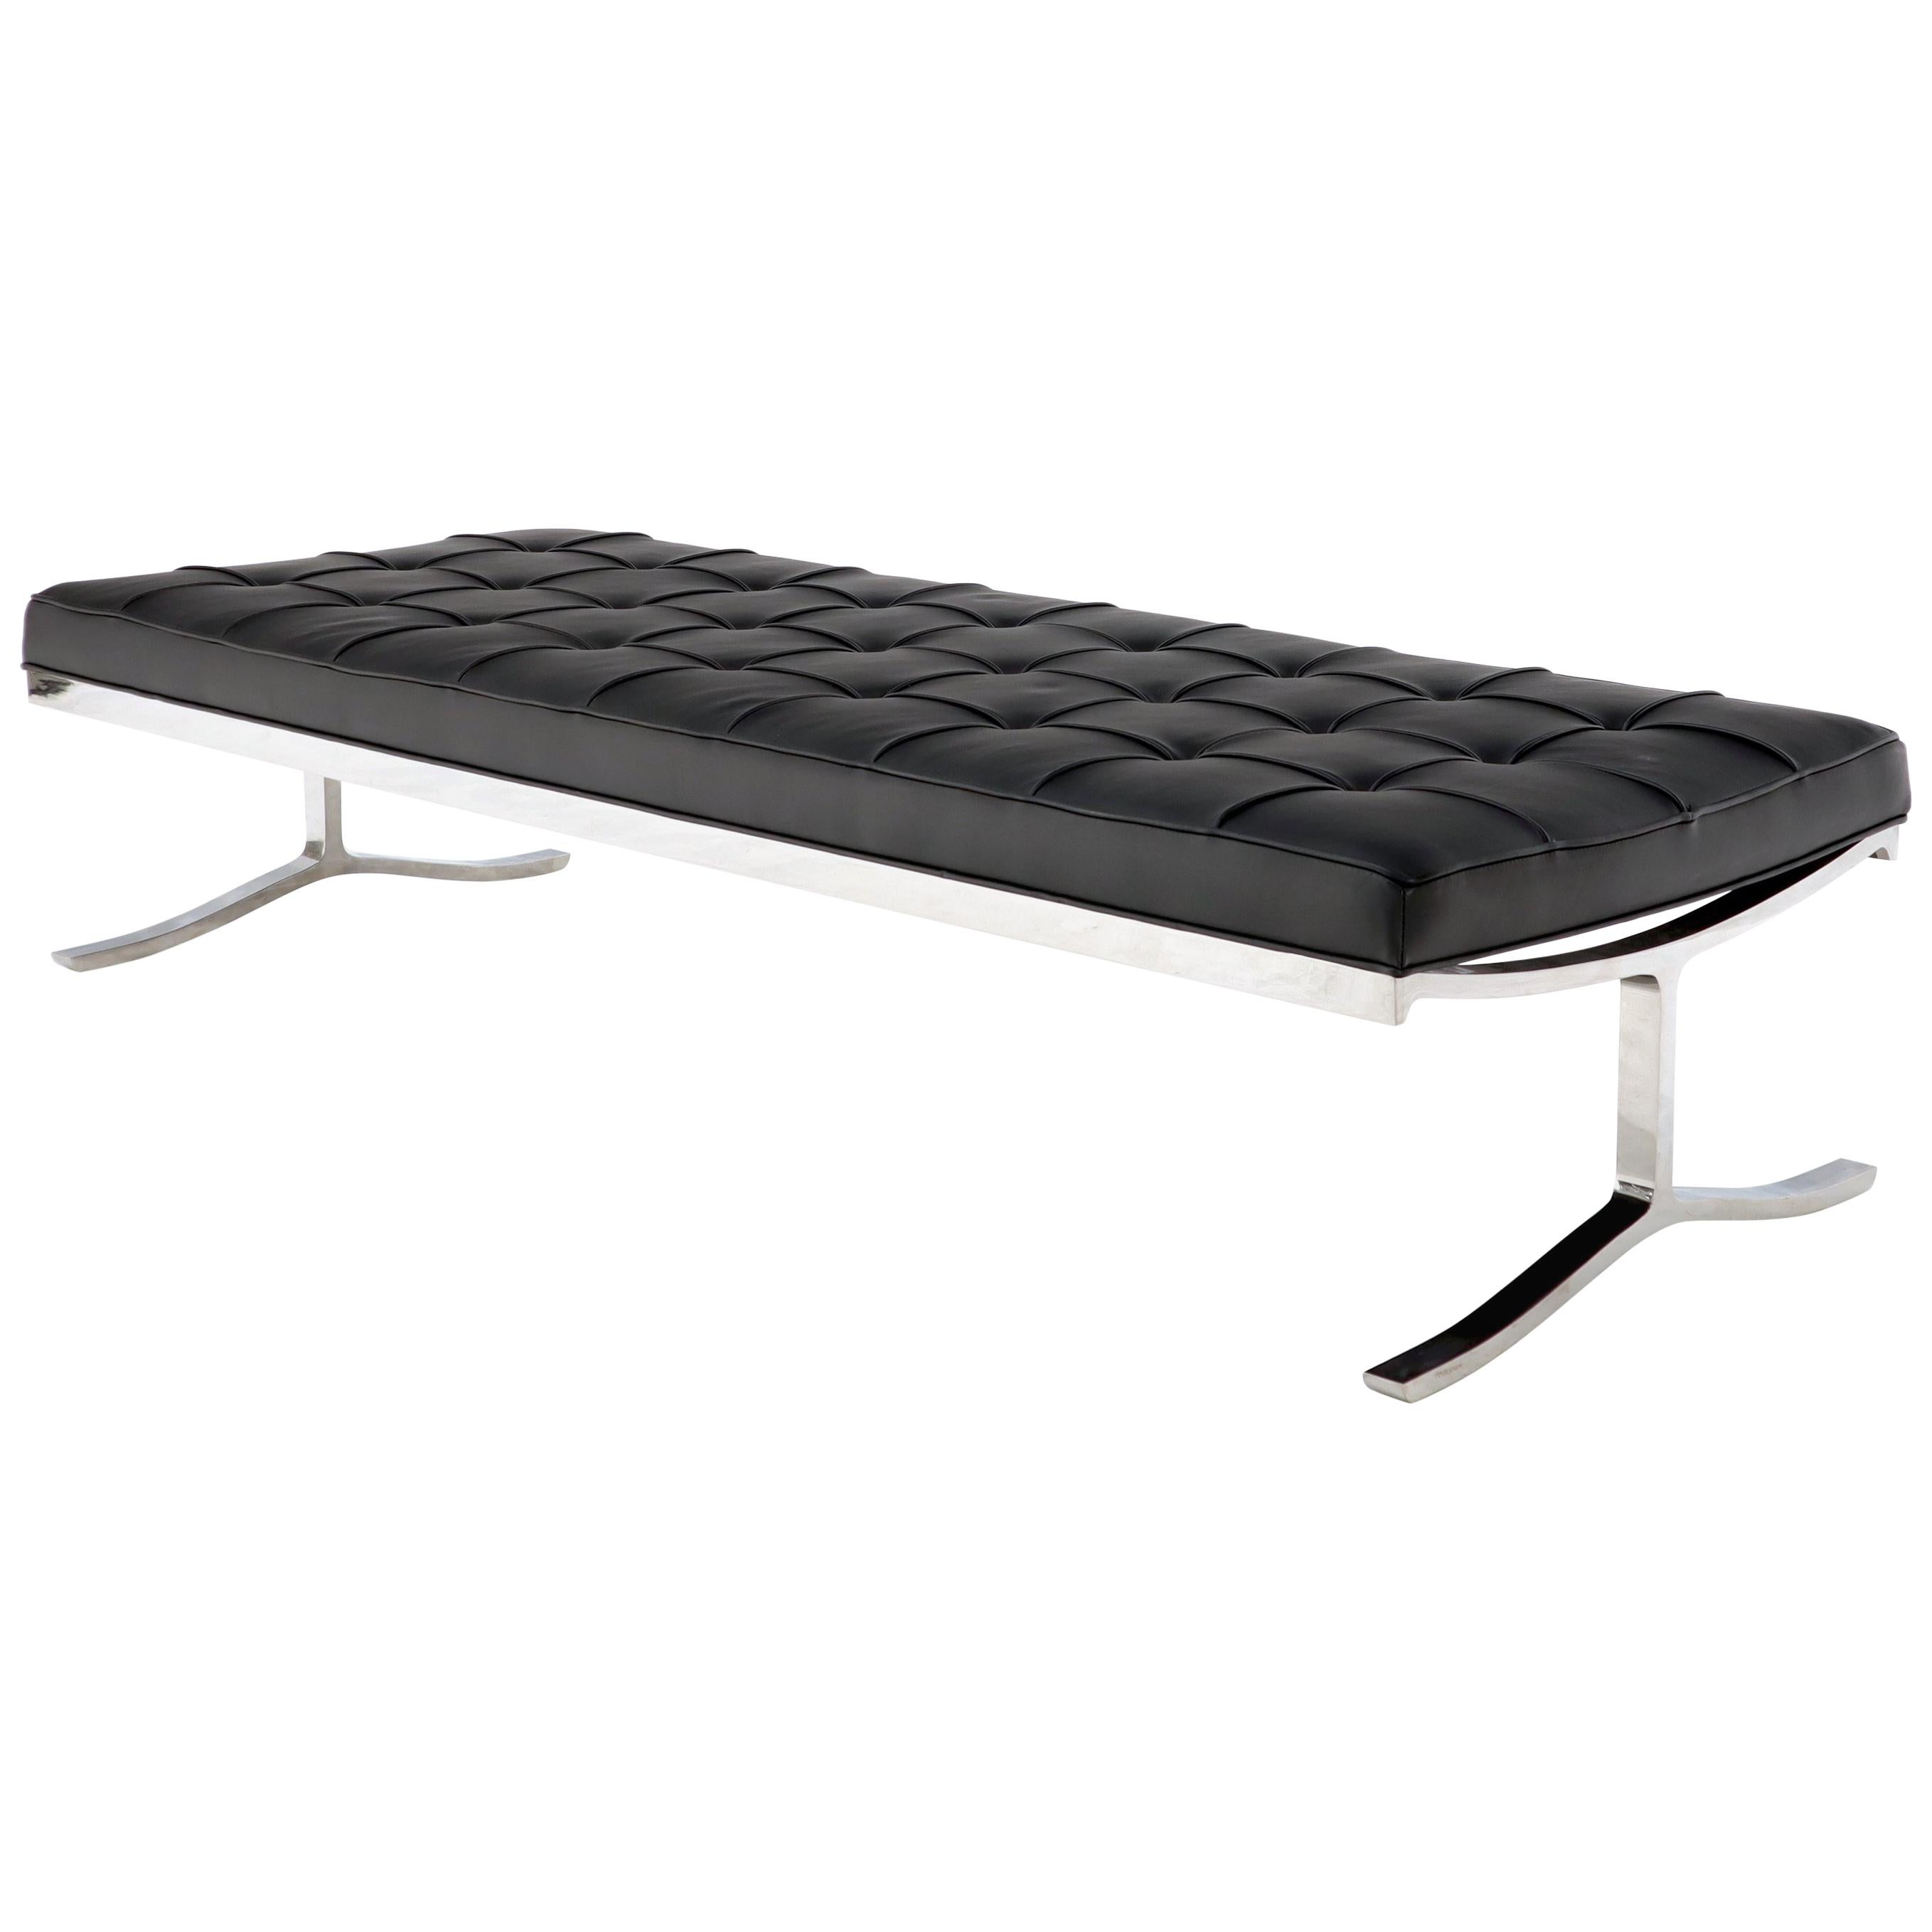 Nico Zographos Chrome and Leather Large Bench Extra Wide Daybed